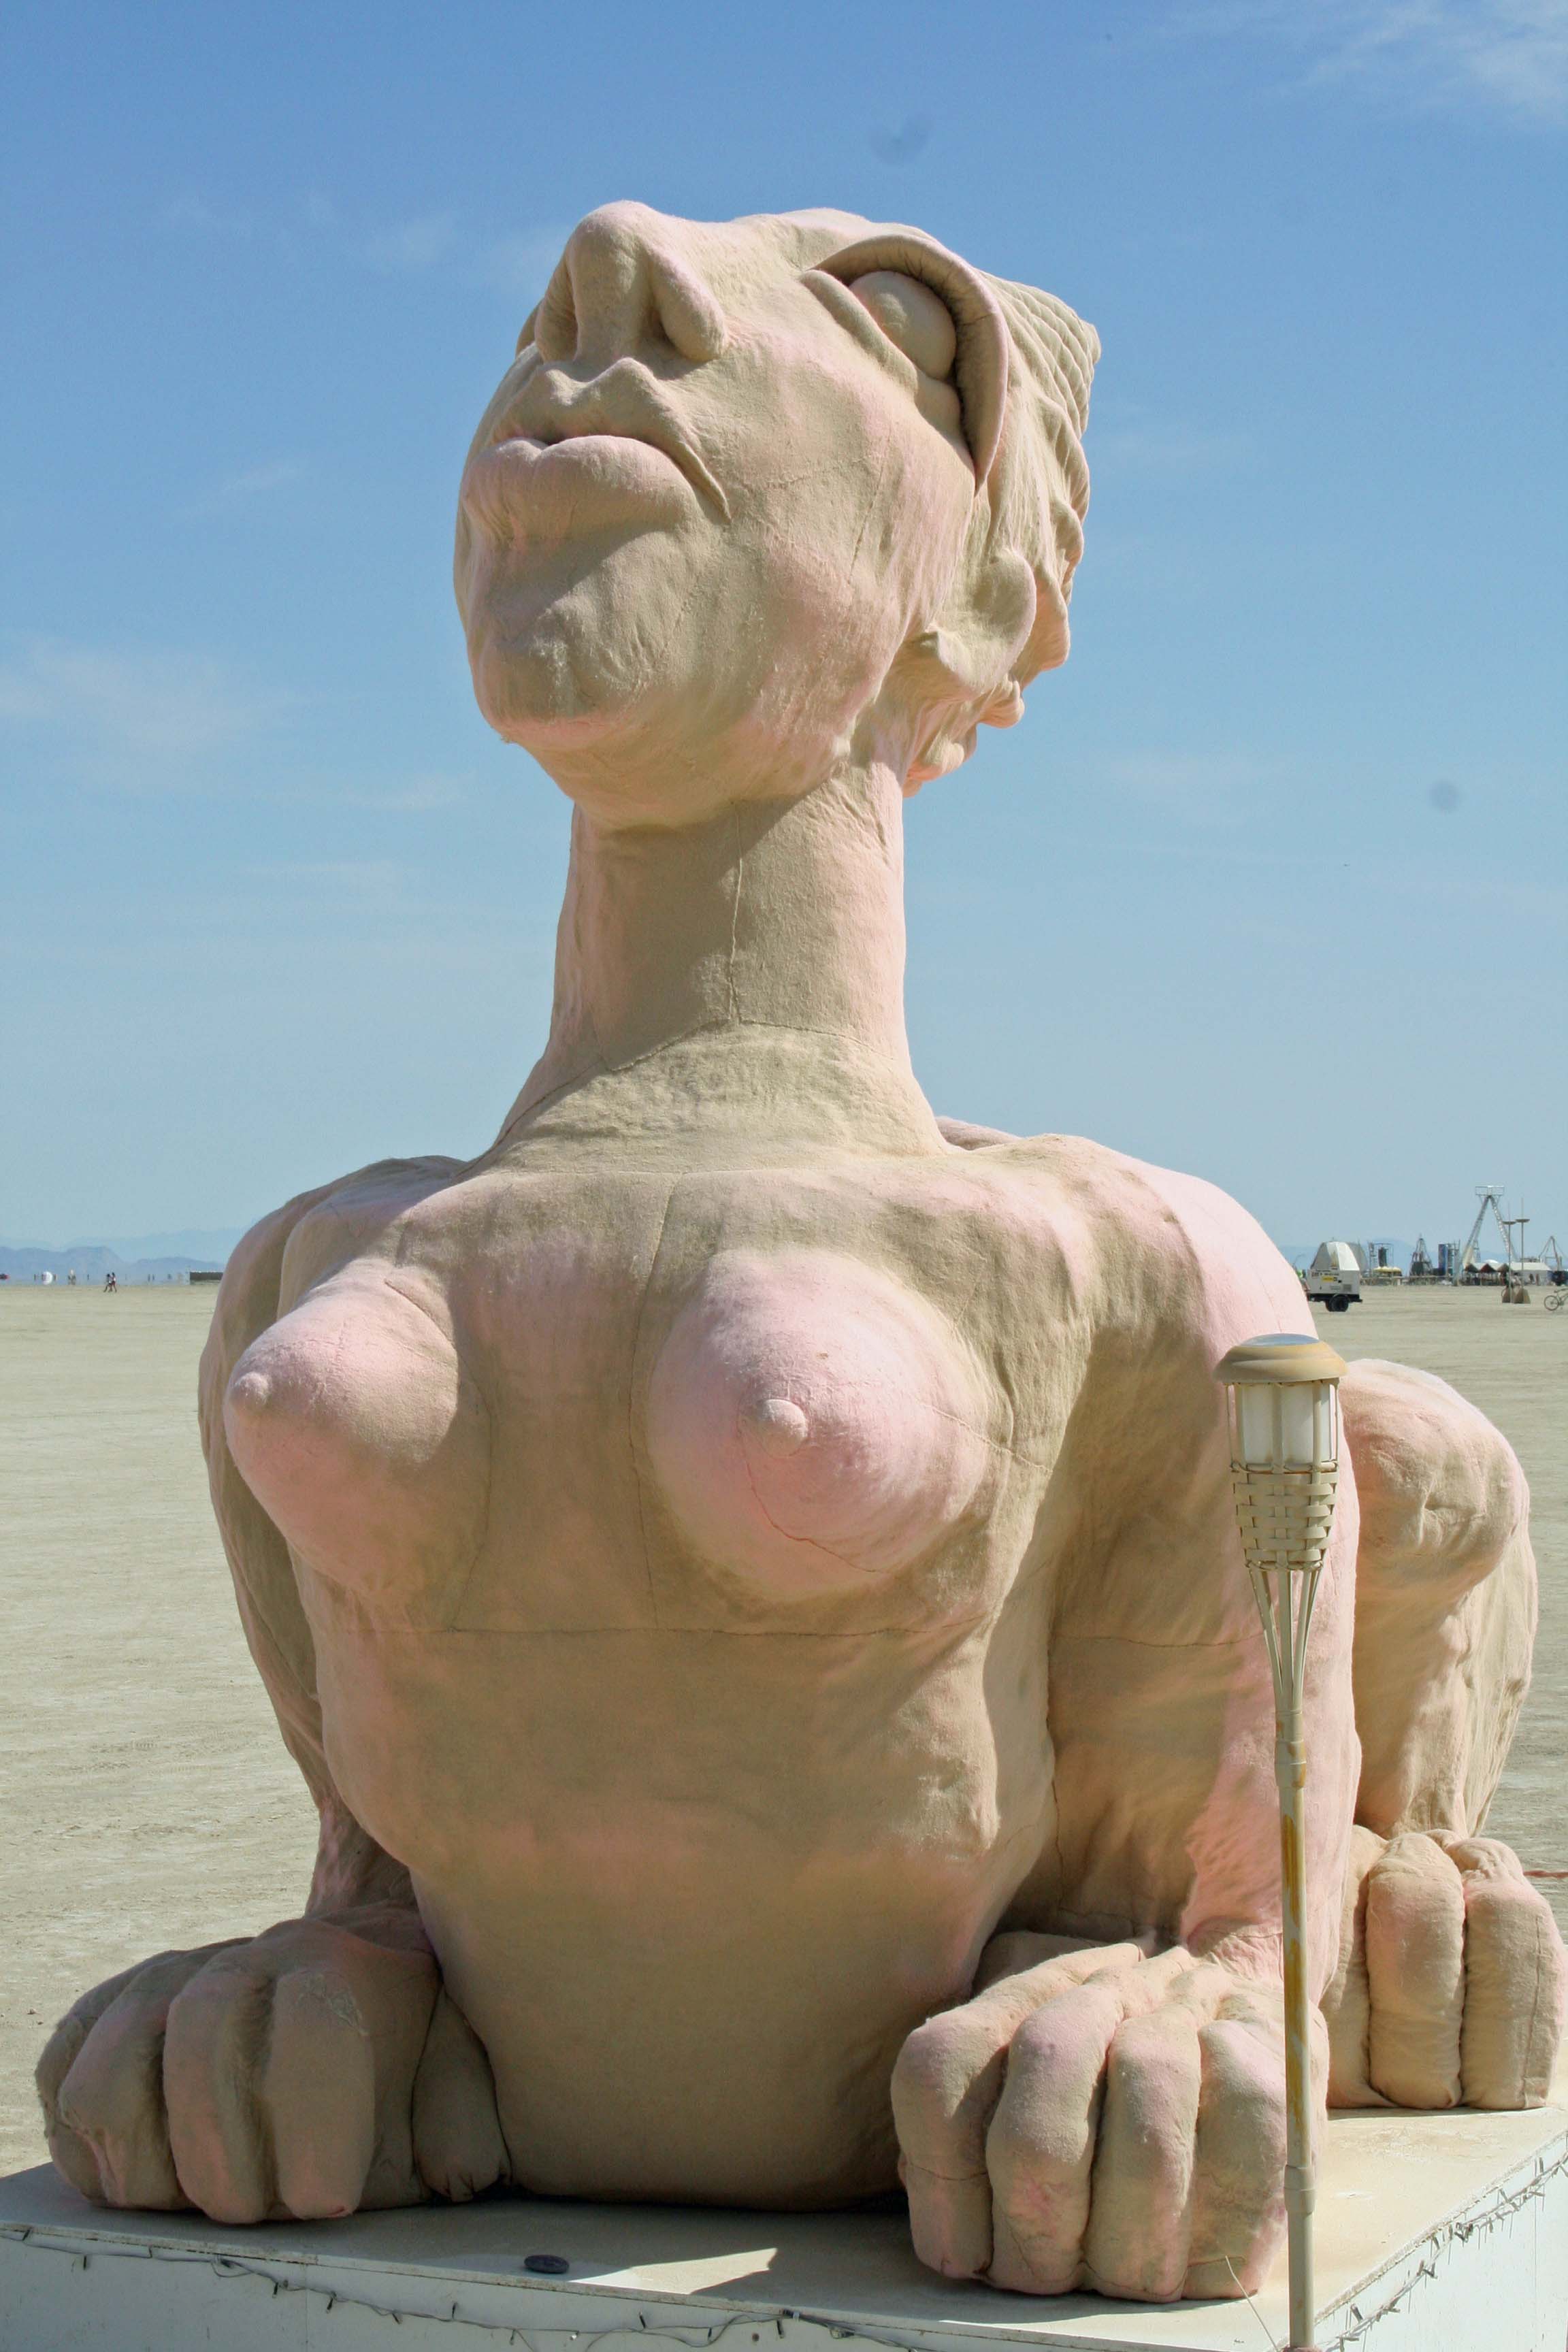 Going topless isn't uncommon, as demonstrated by this lady sphinx.